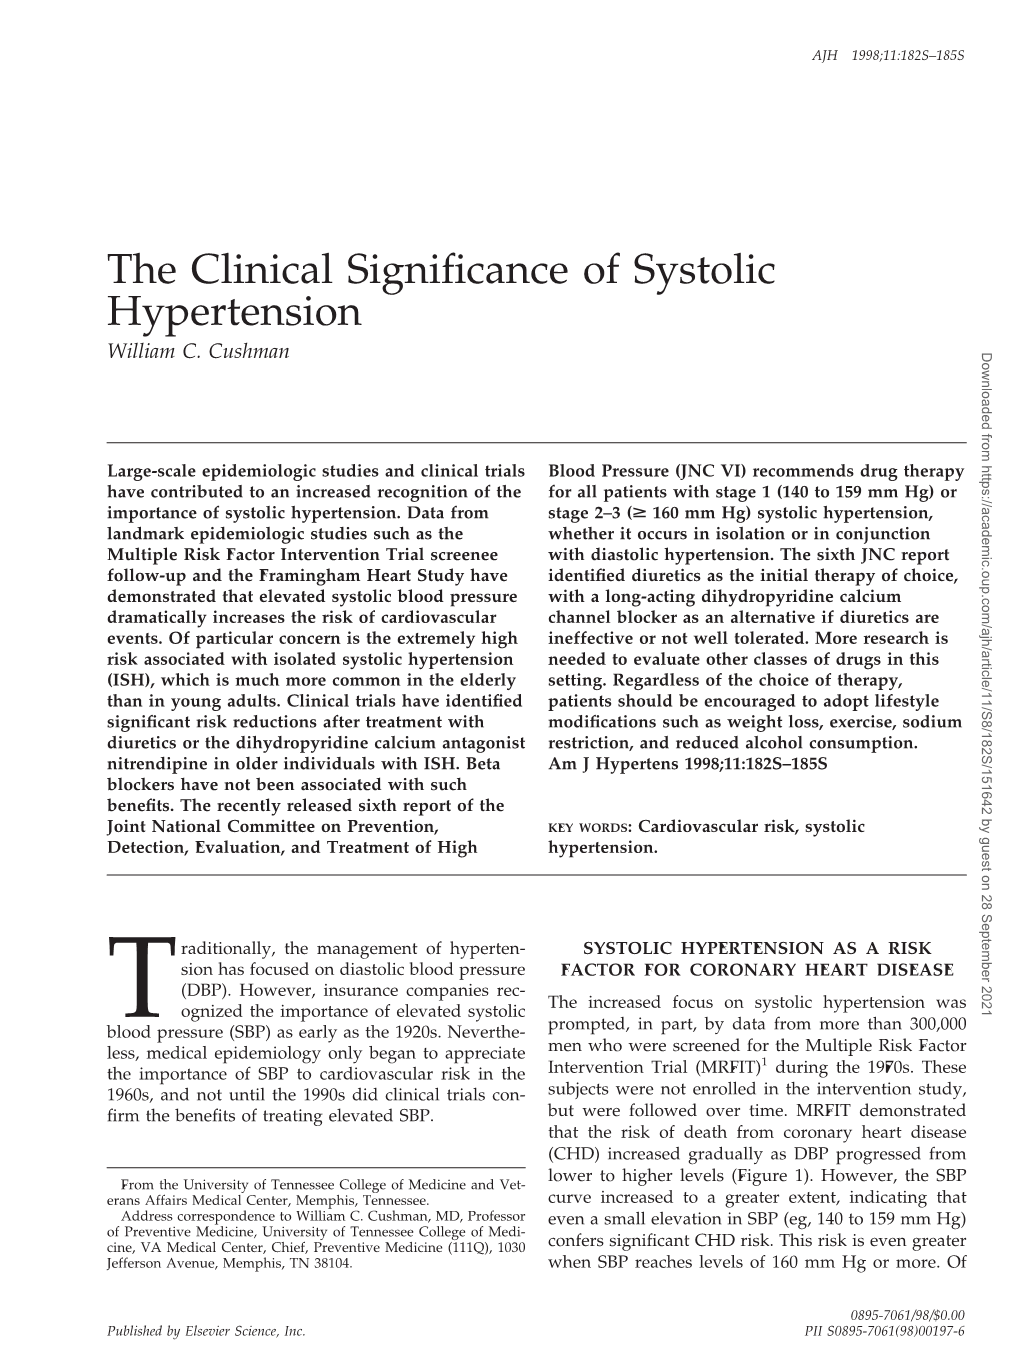 The Clinical Significance of Systolic Hypertension